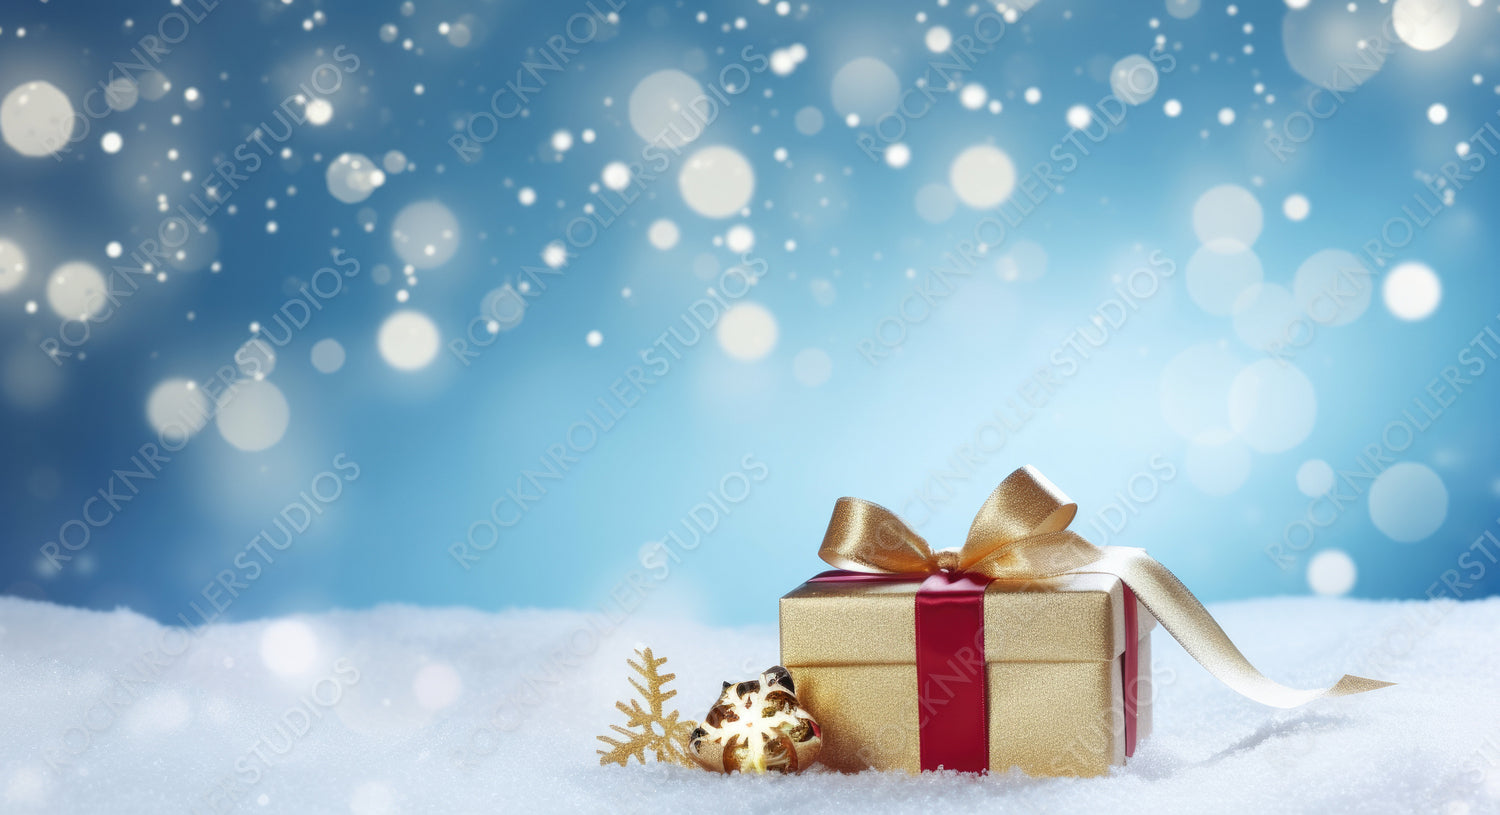 Festive Christmas snow background with copy space. Golden gift box with red ribbon, snowflake on snow on blue background with beautiful bokeh circles.